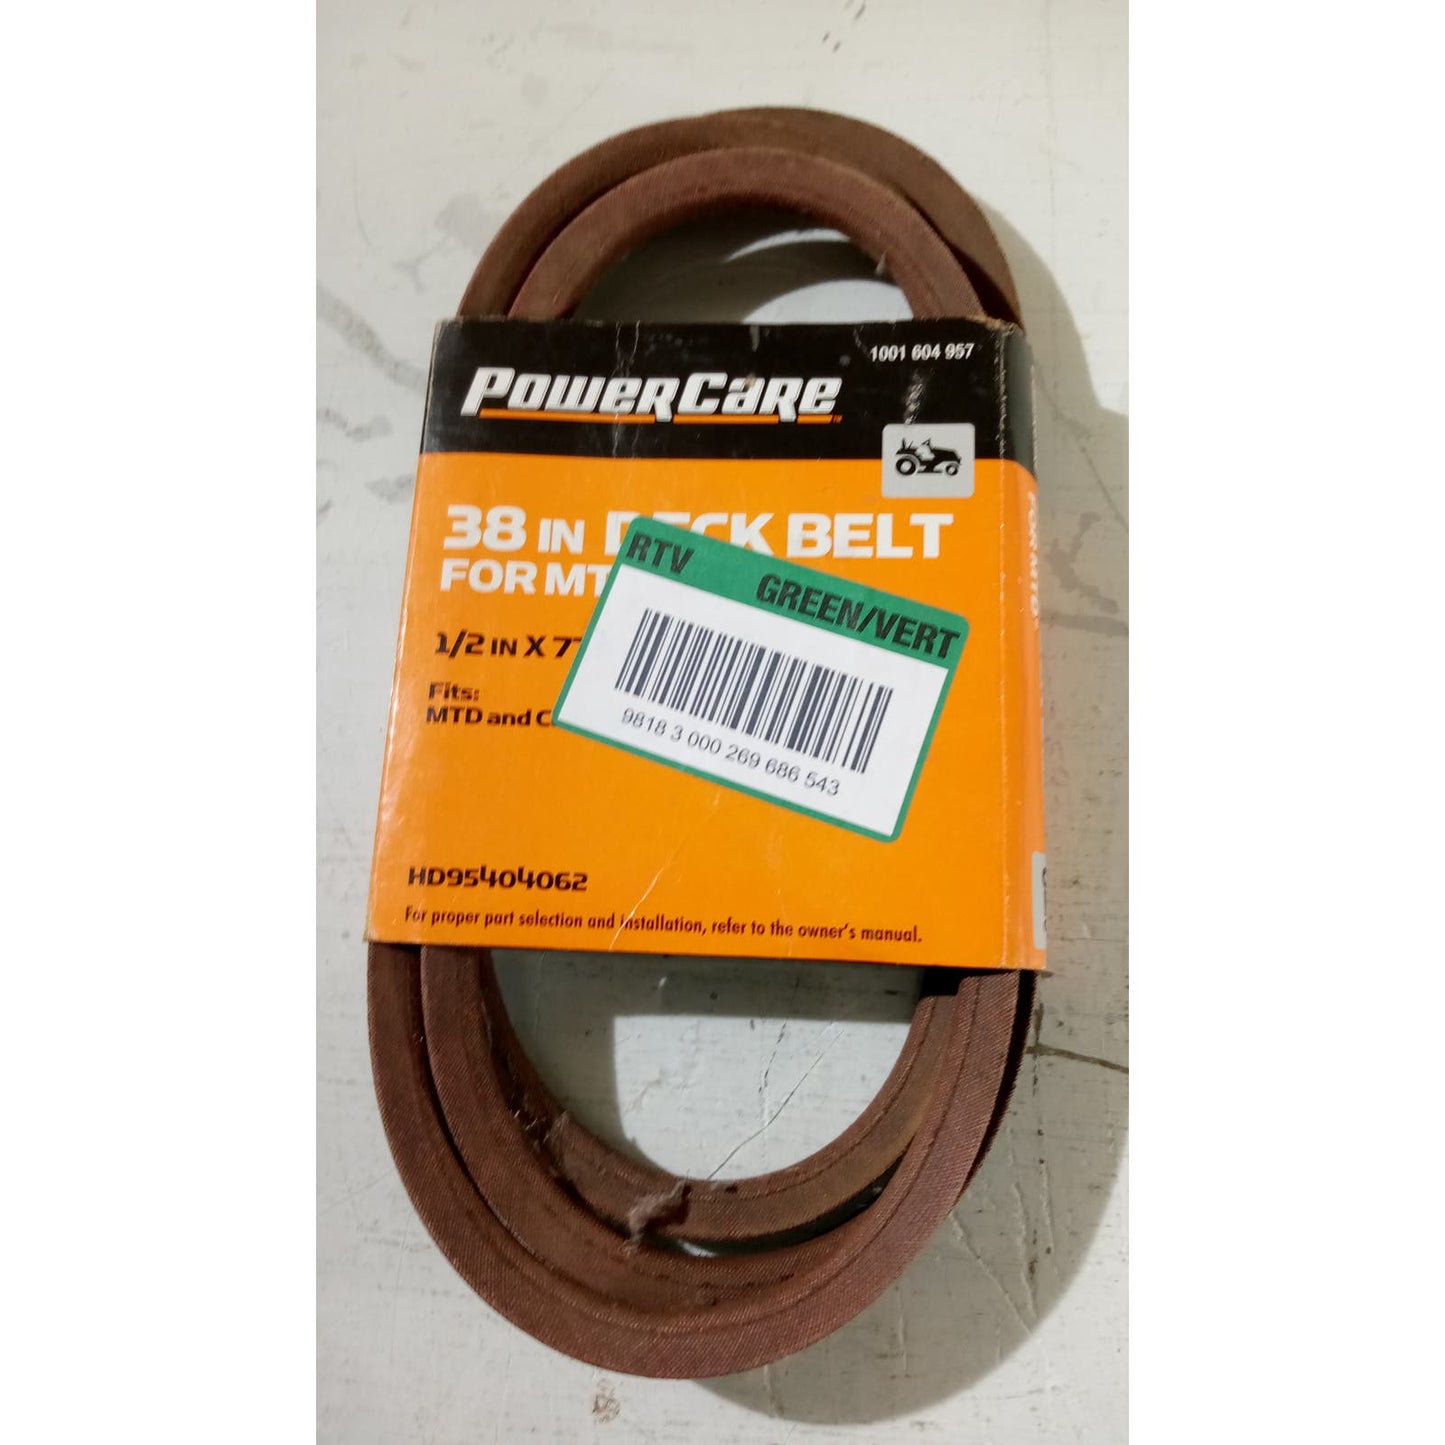 Powercare 38 in. Tractor Deck Belt Fit Multiple MTD/Cub Cadets, See Last Image